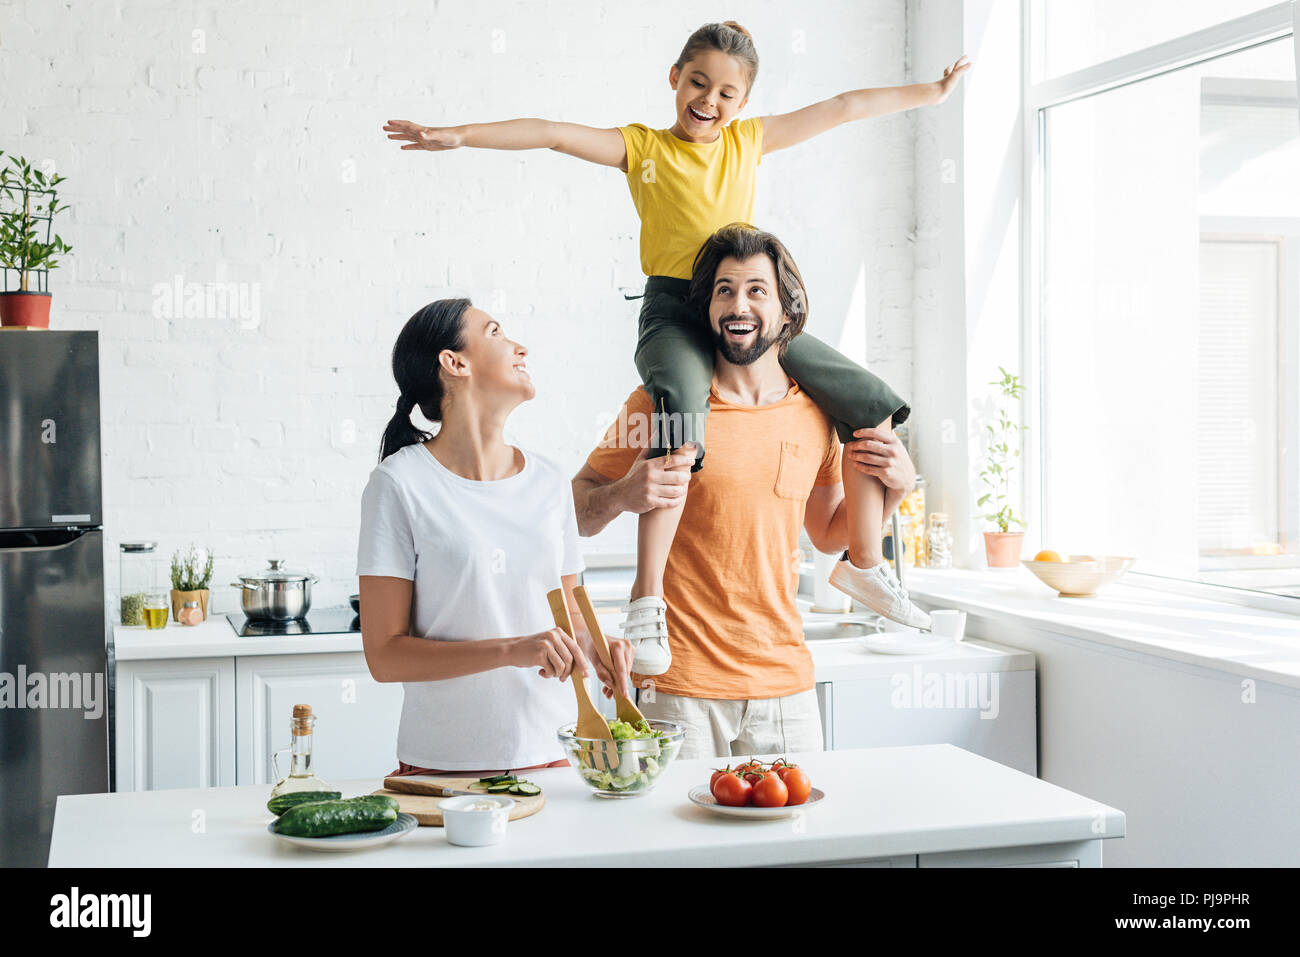 beautiful young woman preparing salad while her daughter riding on shoulders of husband at kitchen Stock Photo